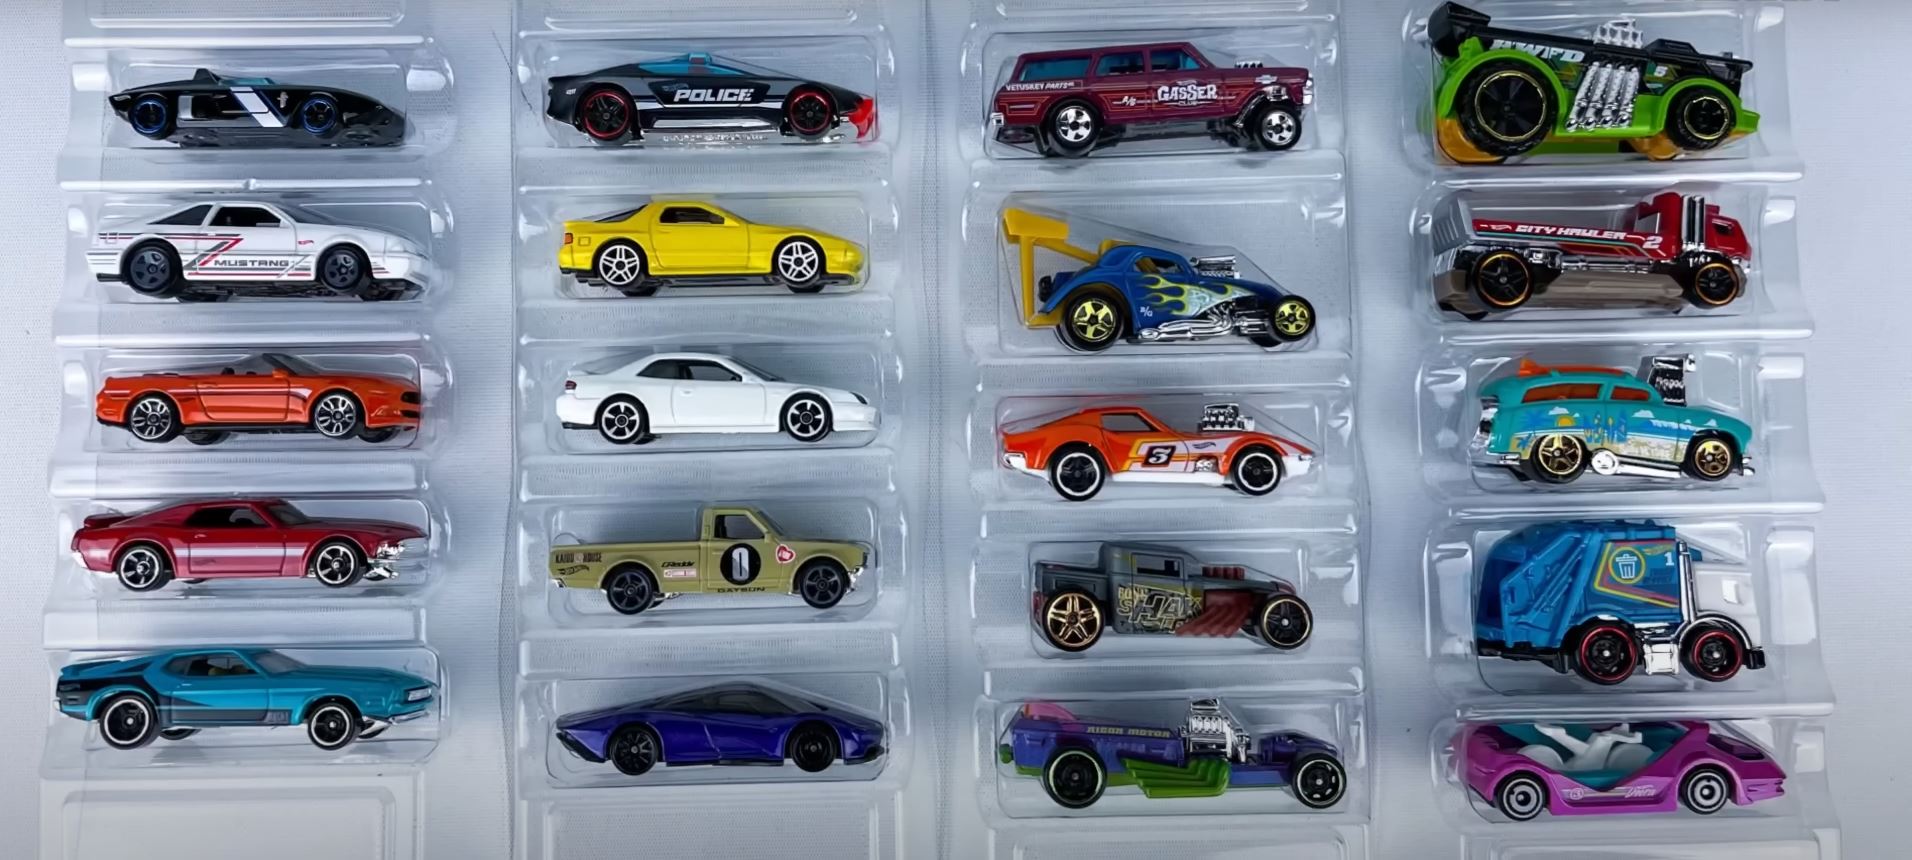 Hot Wheels Celebrates the Ford Mustang With a New 5-Pack, There Are More  Surprises Still - autoevolution